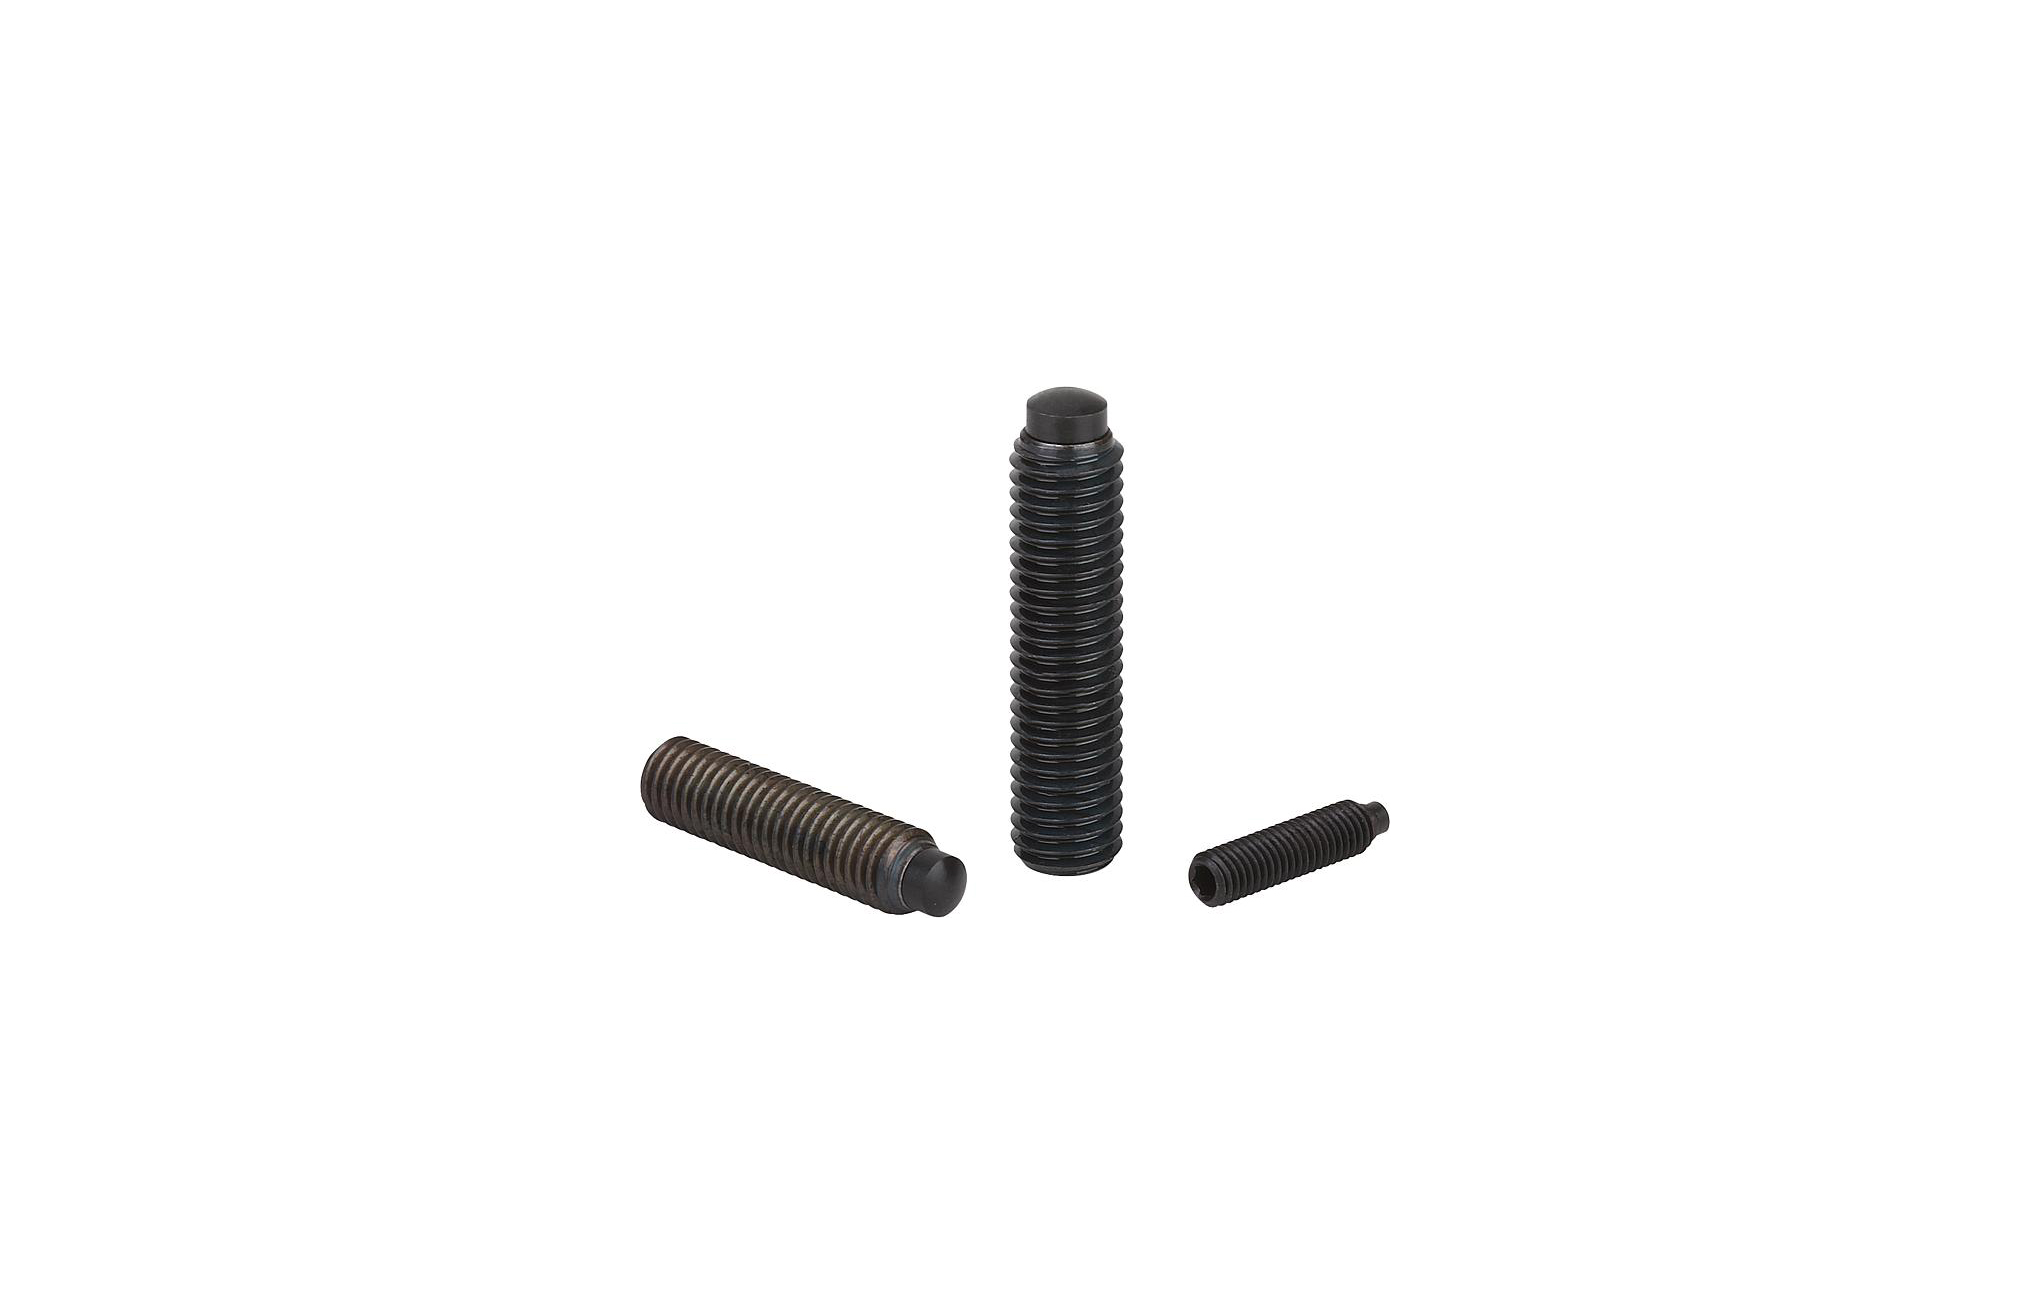 K0403 Thrust screws with rounded half-dog point